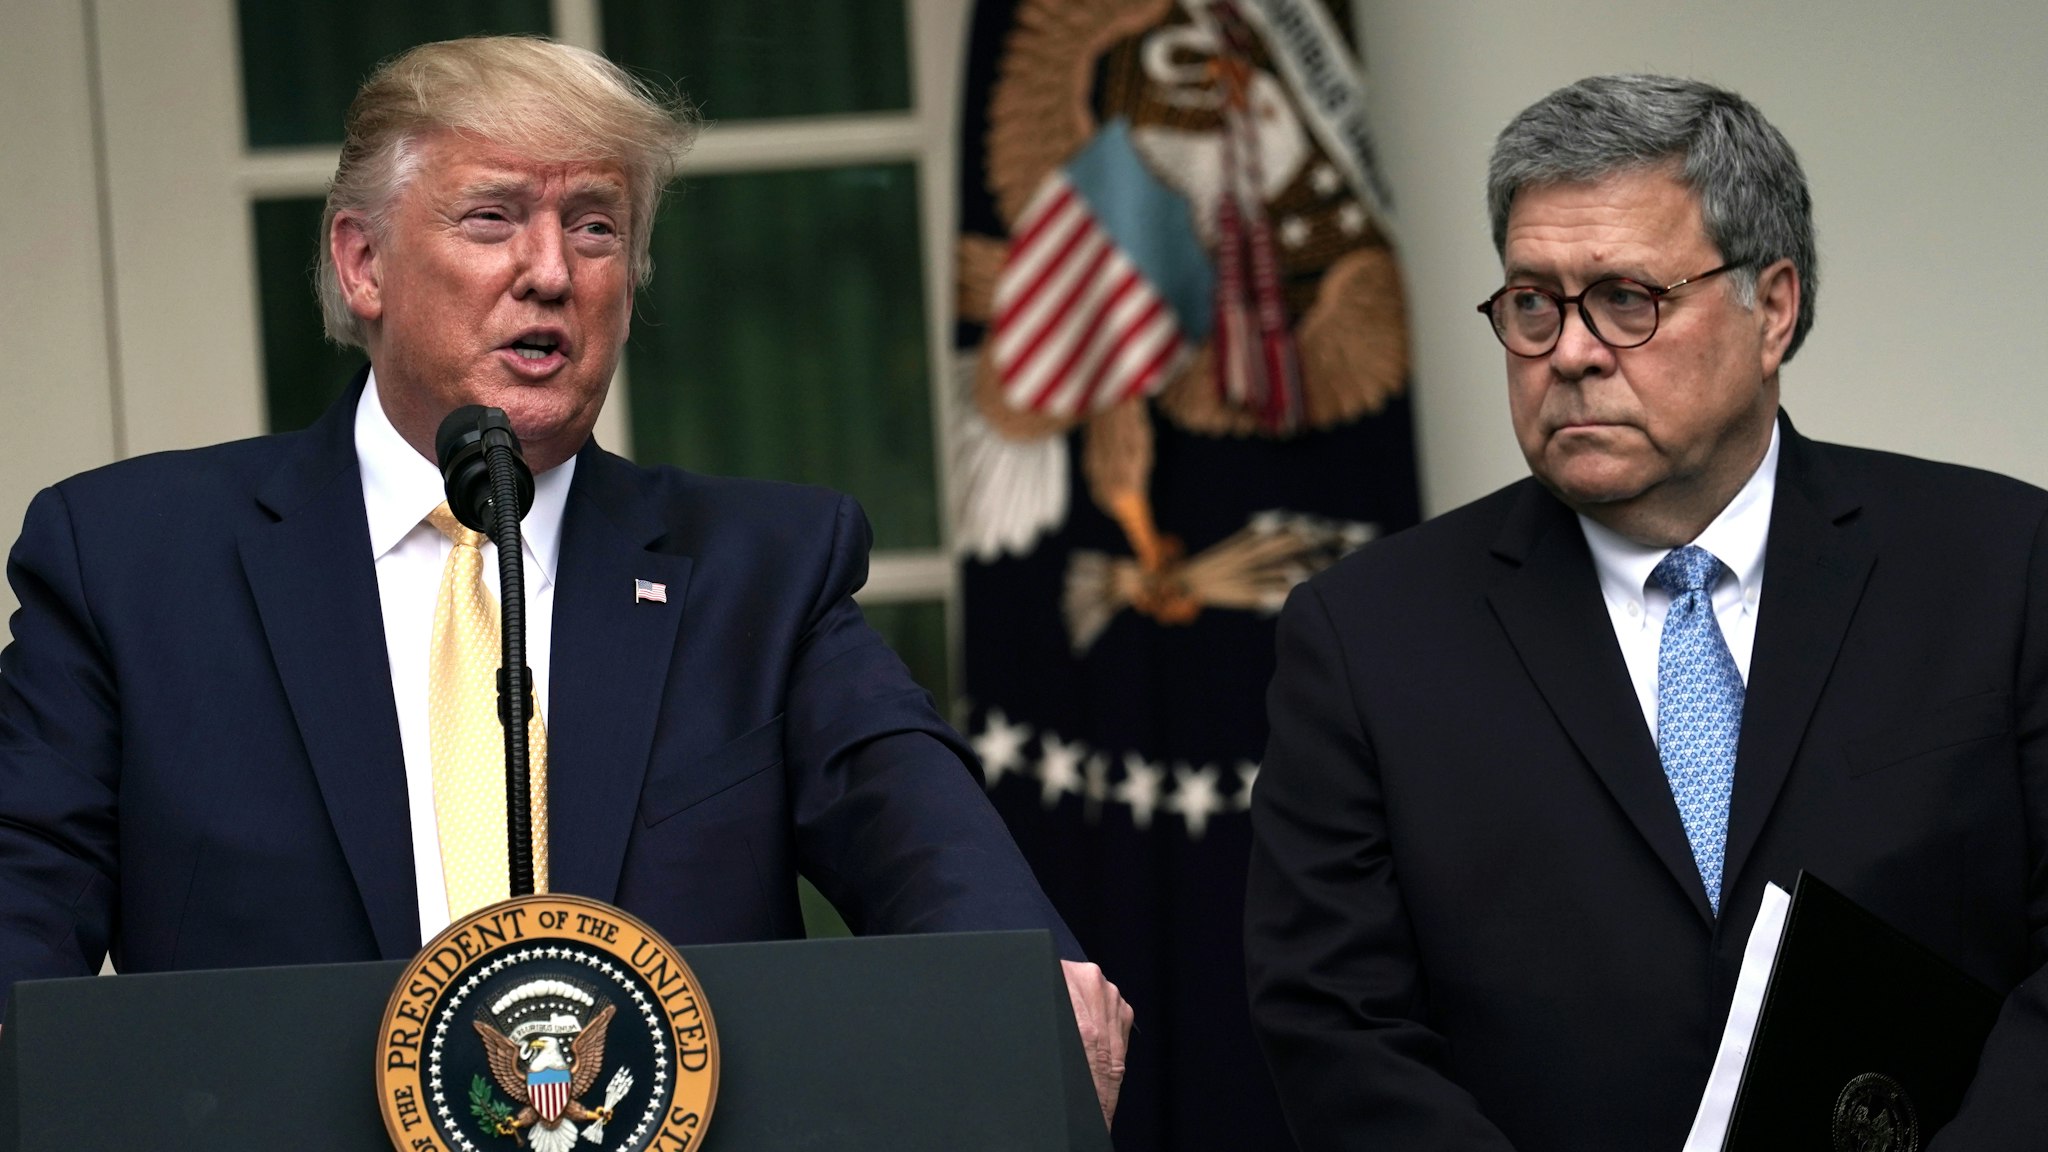 WASHINGTON, DC - JULY 11: U.S. President Donald Trump makes a statement on the census with Attorney General William Barr in the Rose Garden of the White House on July 11, 2019 in Washington, DC. President Trump, who had previously pushed to add a citizenship question to the 2020 census, announced that he would direct the Commerce Department to collect that data in other ways.